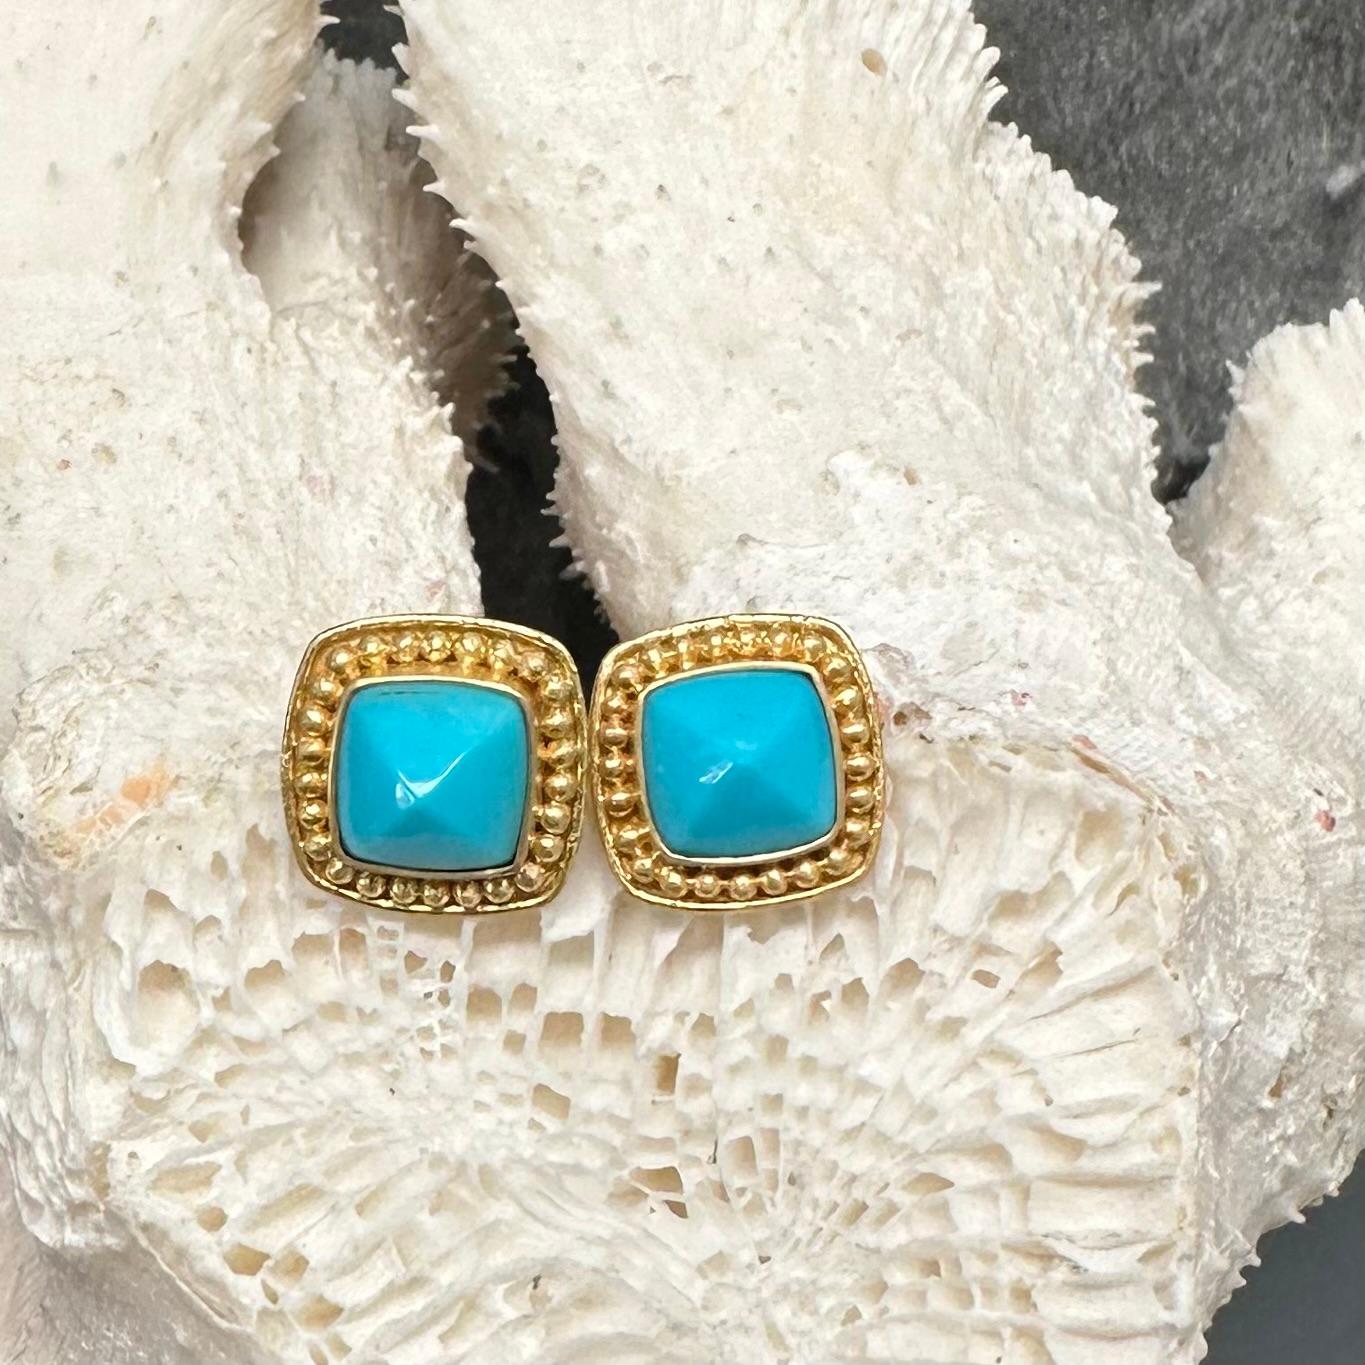 Steven Battelle 4.3 Carats Sleeping Beauty Turquoise 18K Gold Post Earrings In New Condition For Sale In Soquel, CA